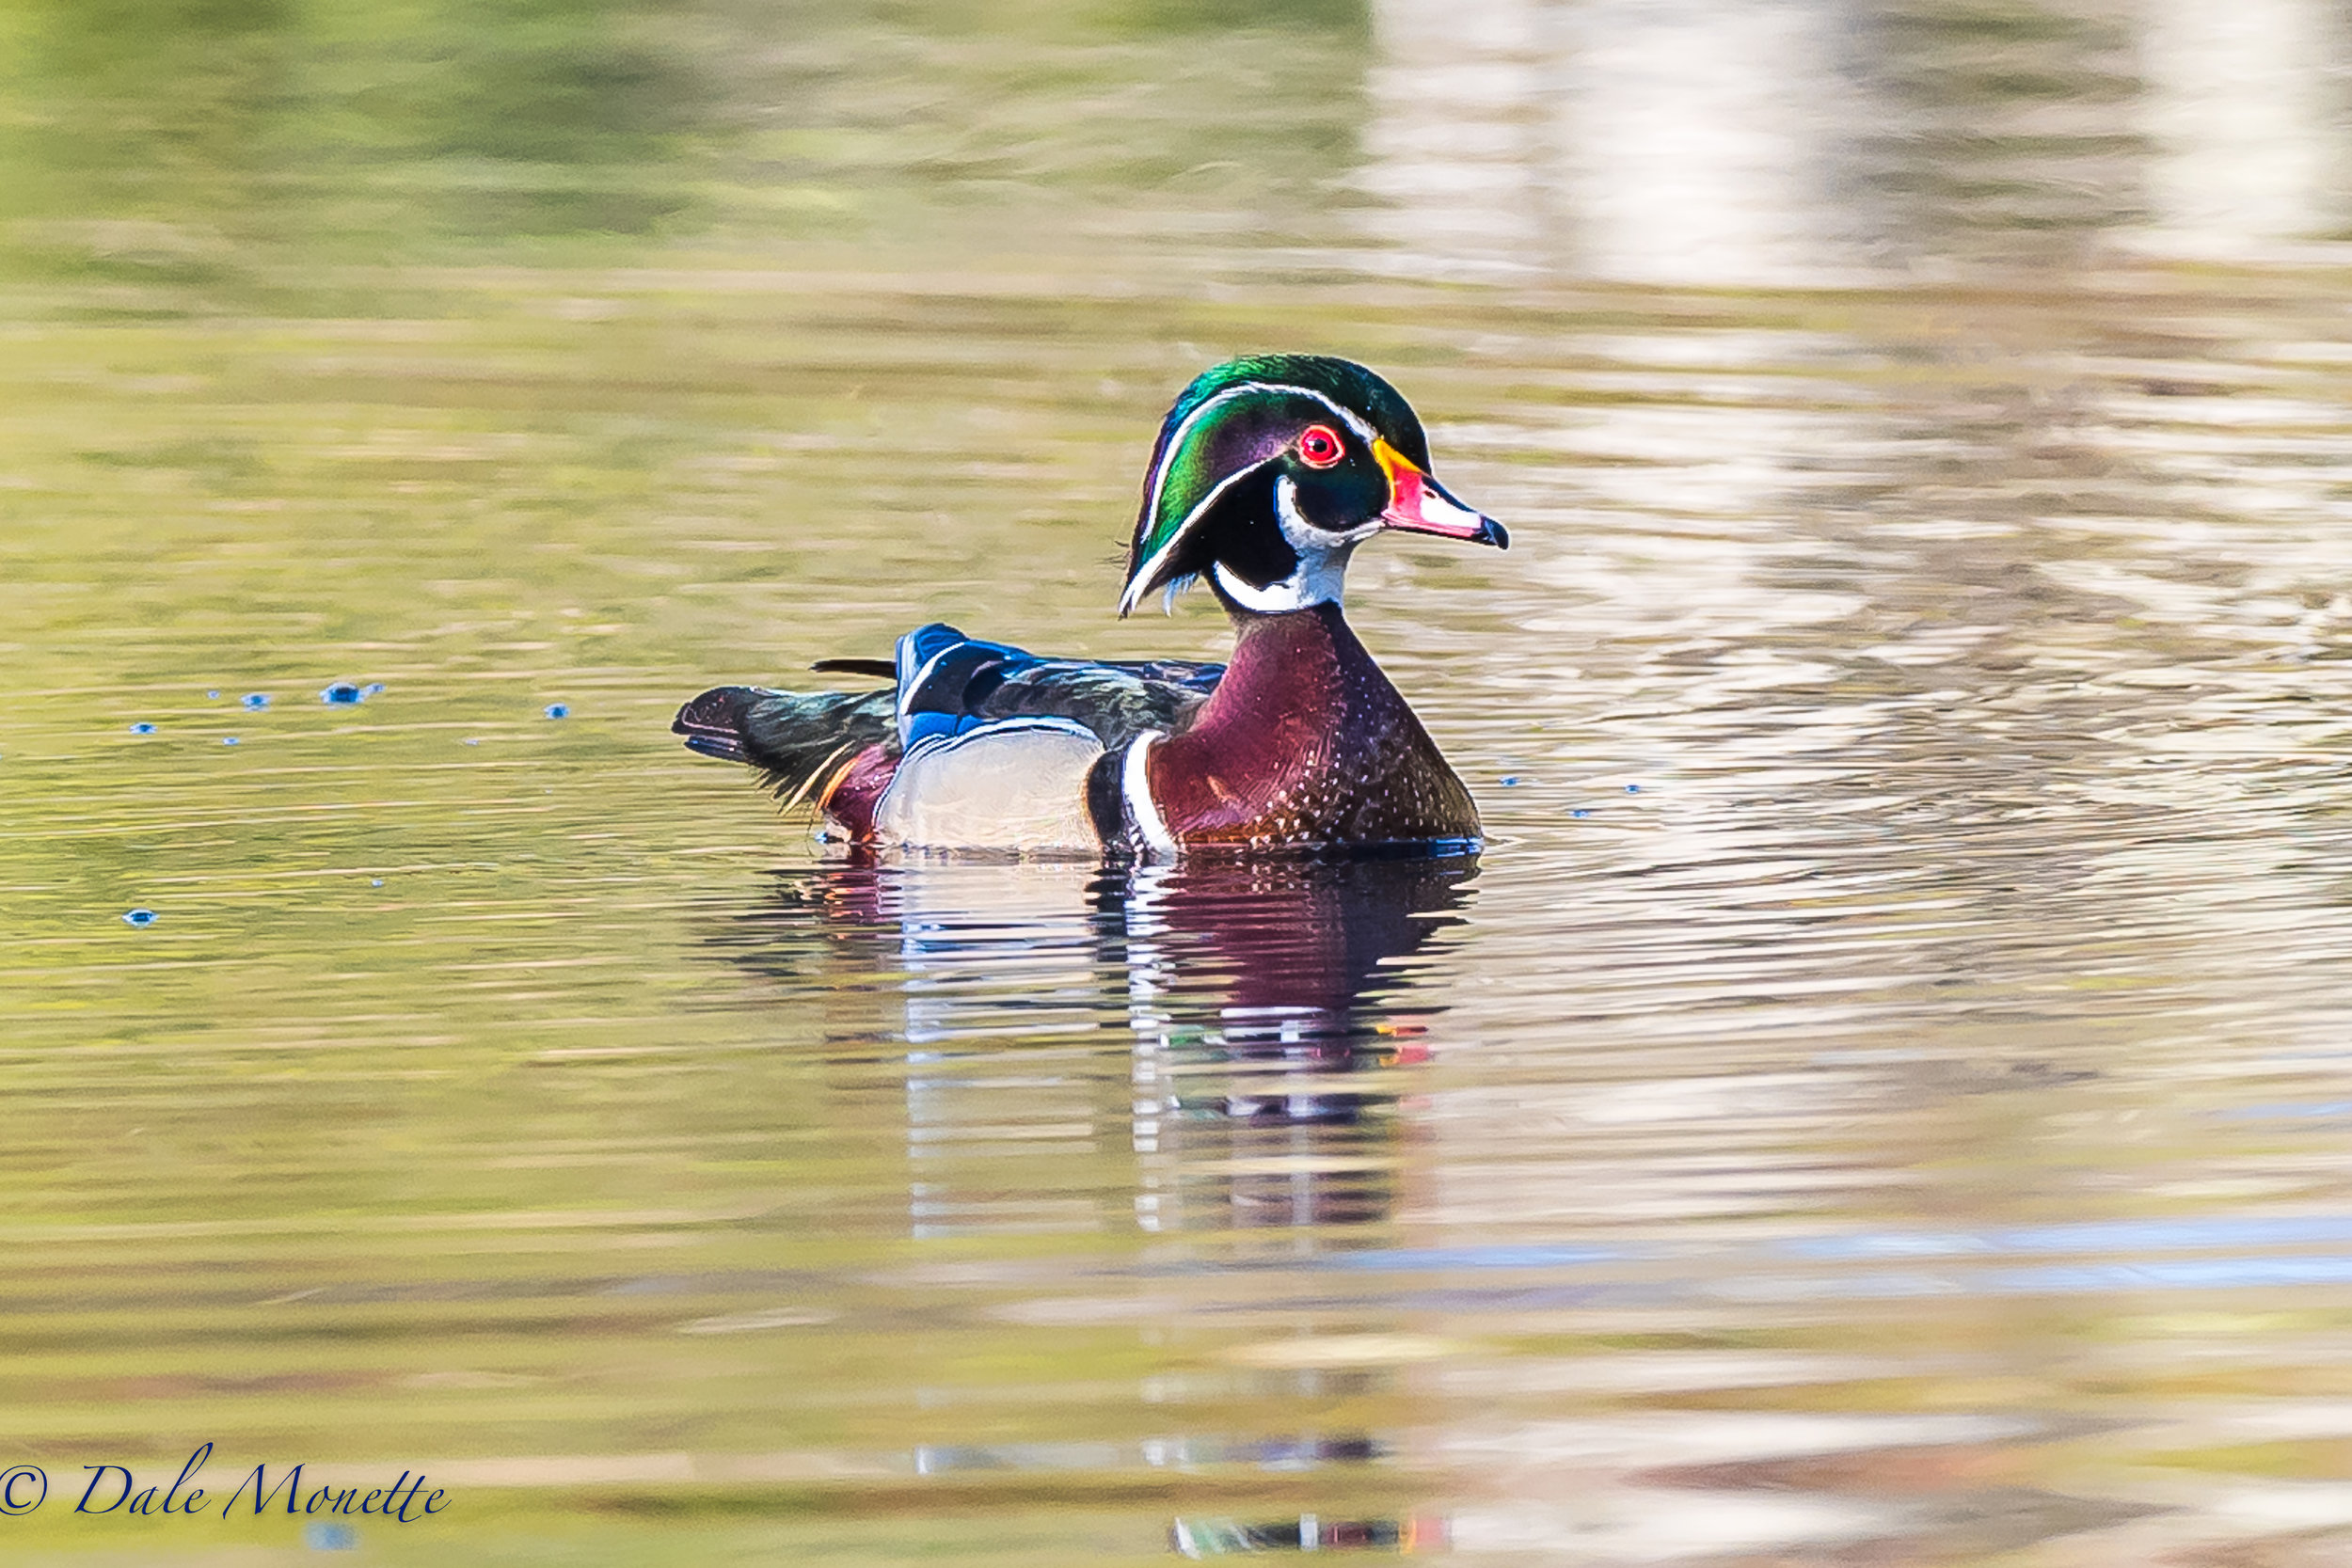   This male wood duck came flying in today and landed smack in front of me right on cue! &nbsp;great to see these guys again. &nbsp;Spring is here for sure. &nbsp;4/14/17  